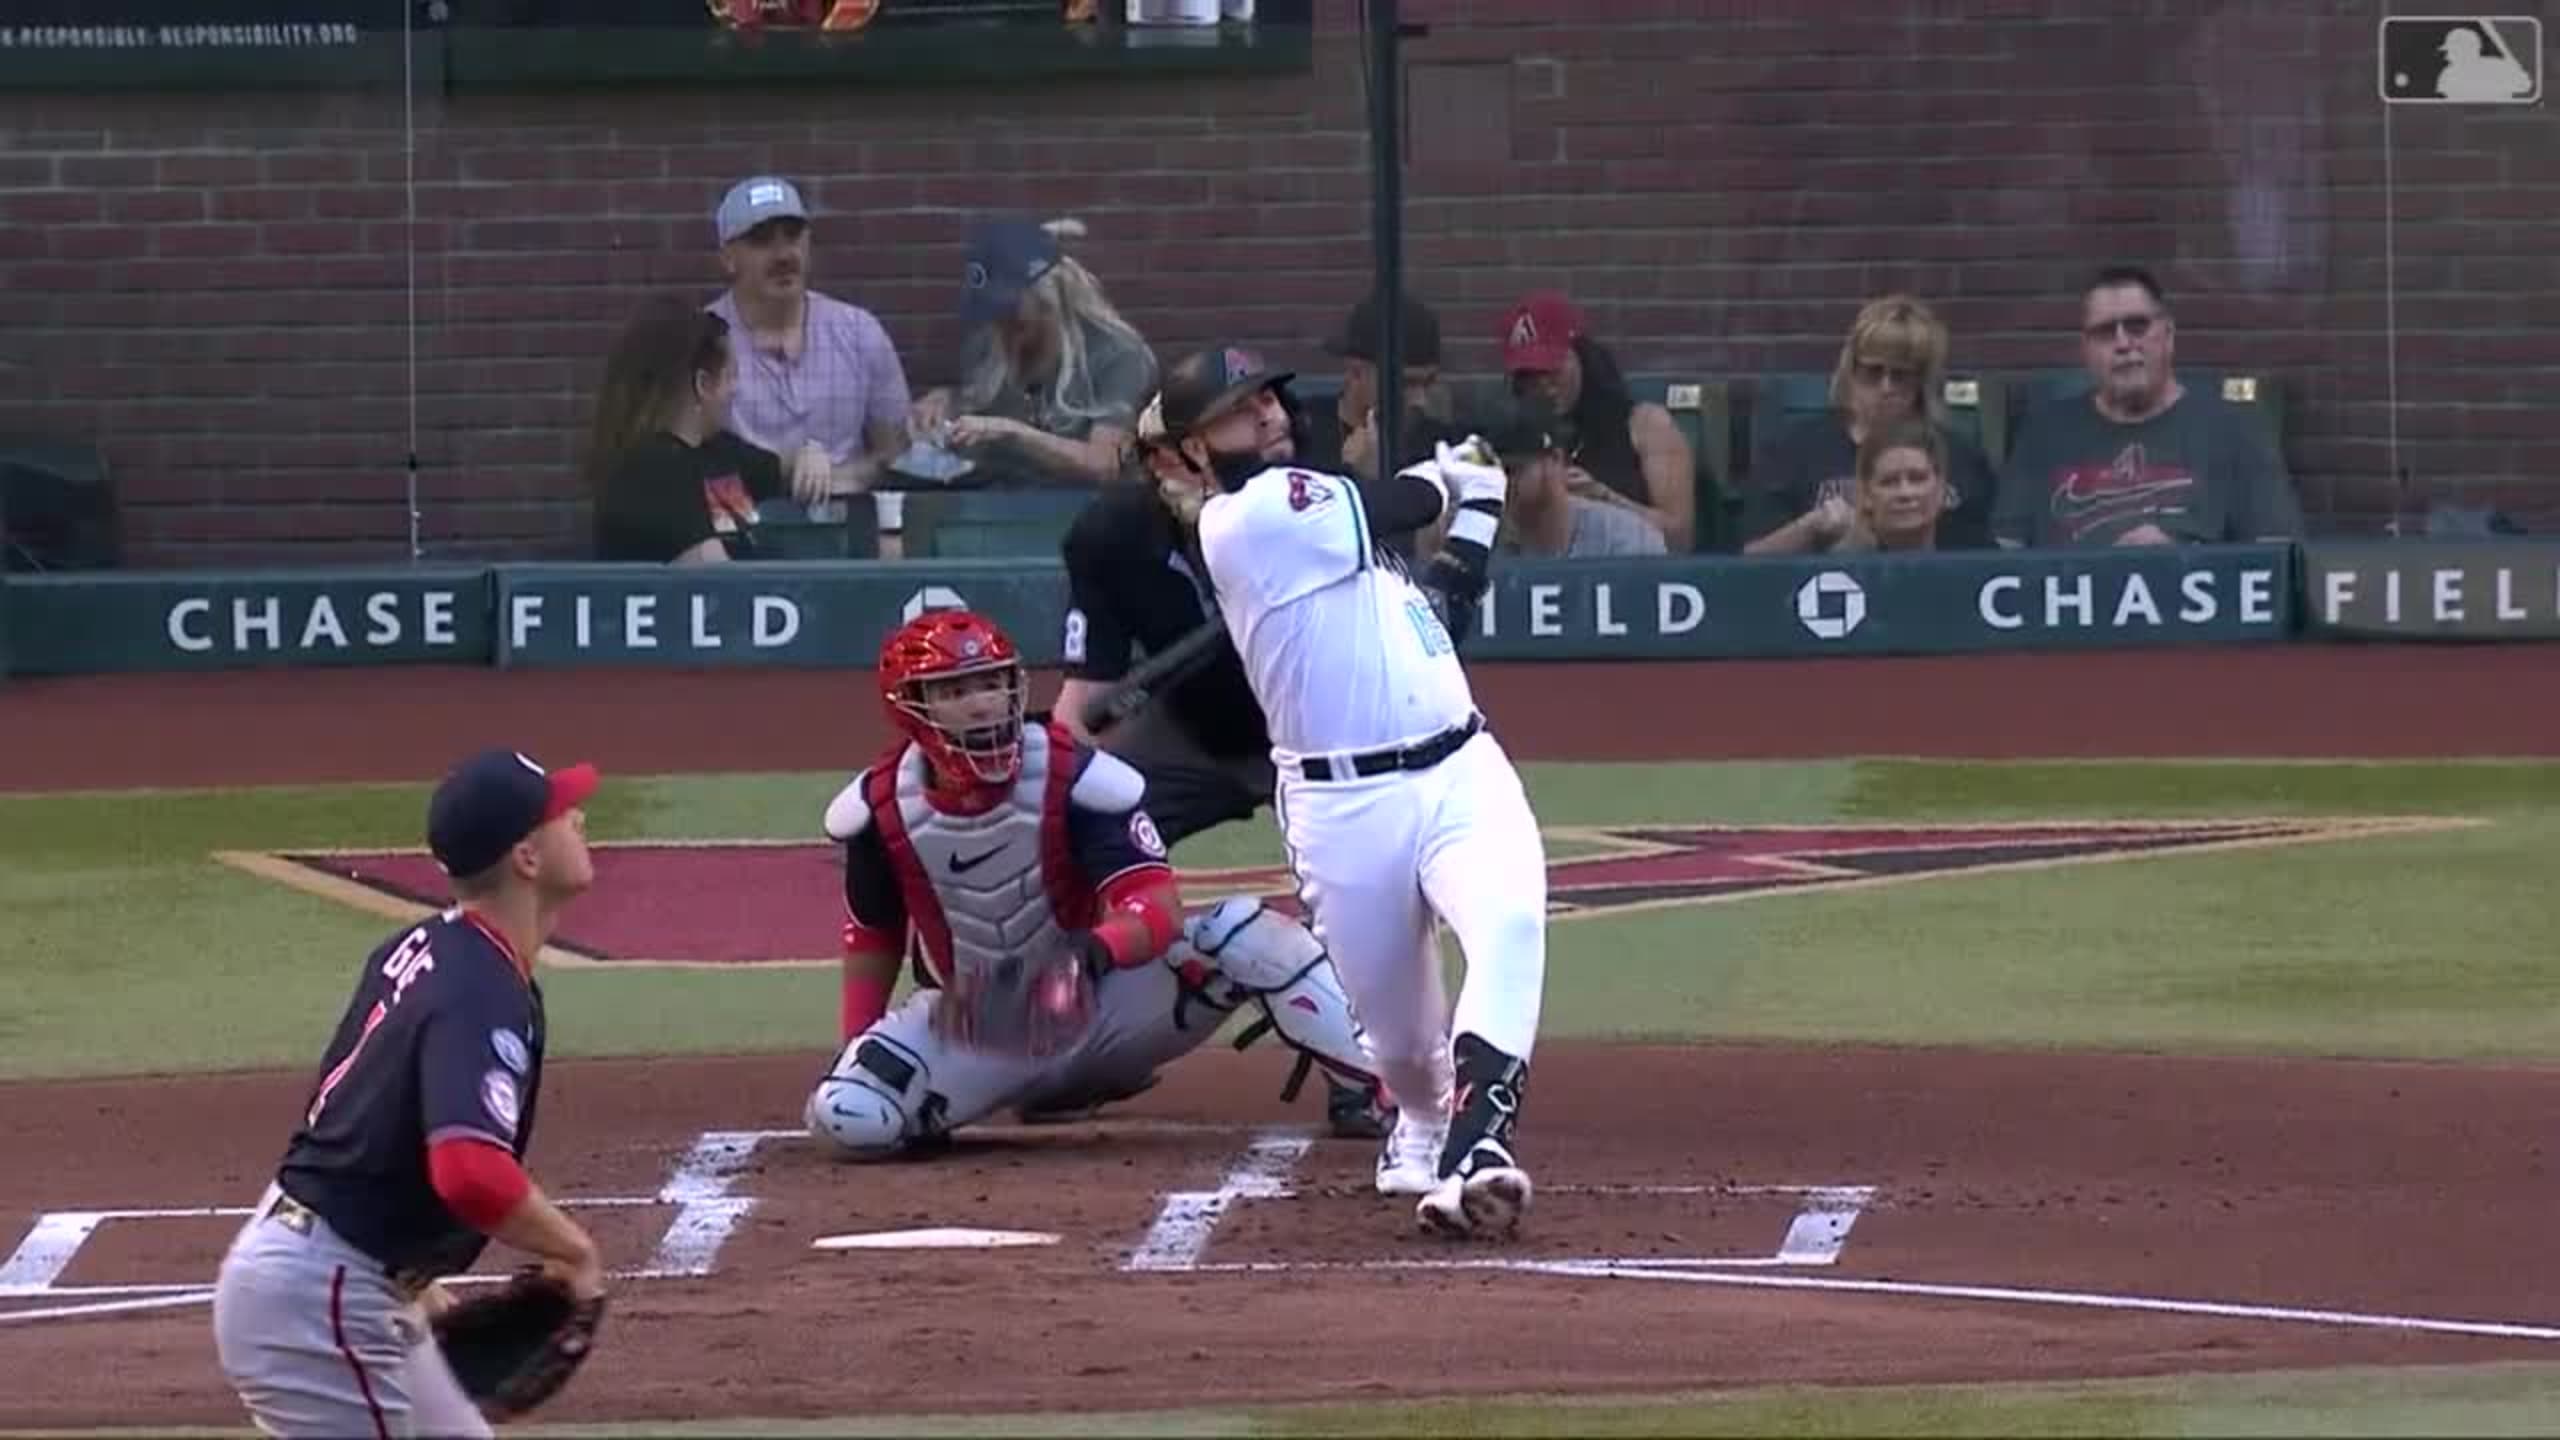 Andrew Chafin's fourth strikeout, 04/05/2021